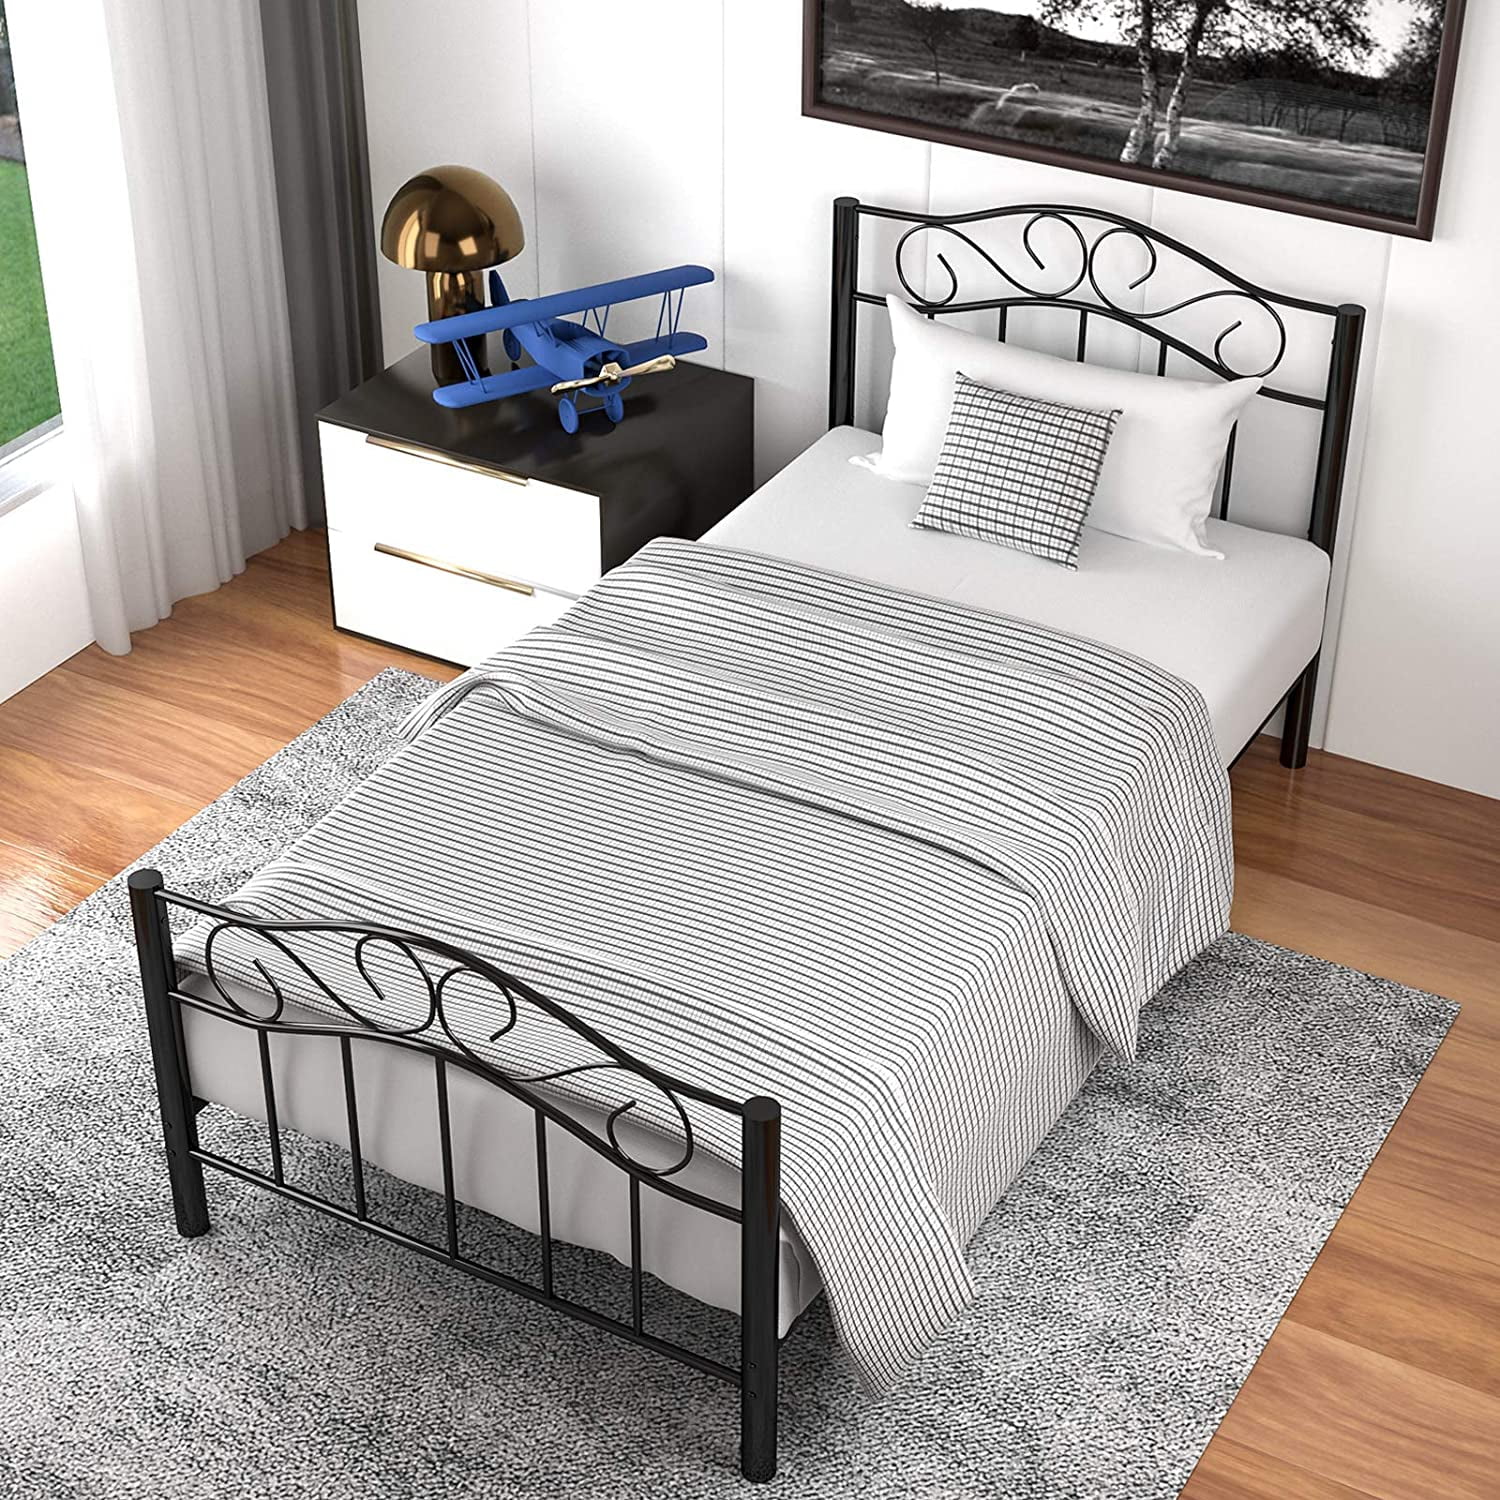 Mecor Twin Xl Curved Metal Bed Frame, How Long Is An Extra Long Twin Bed Frame